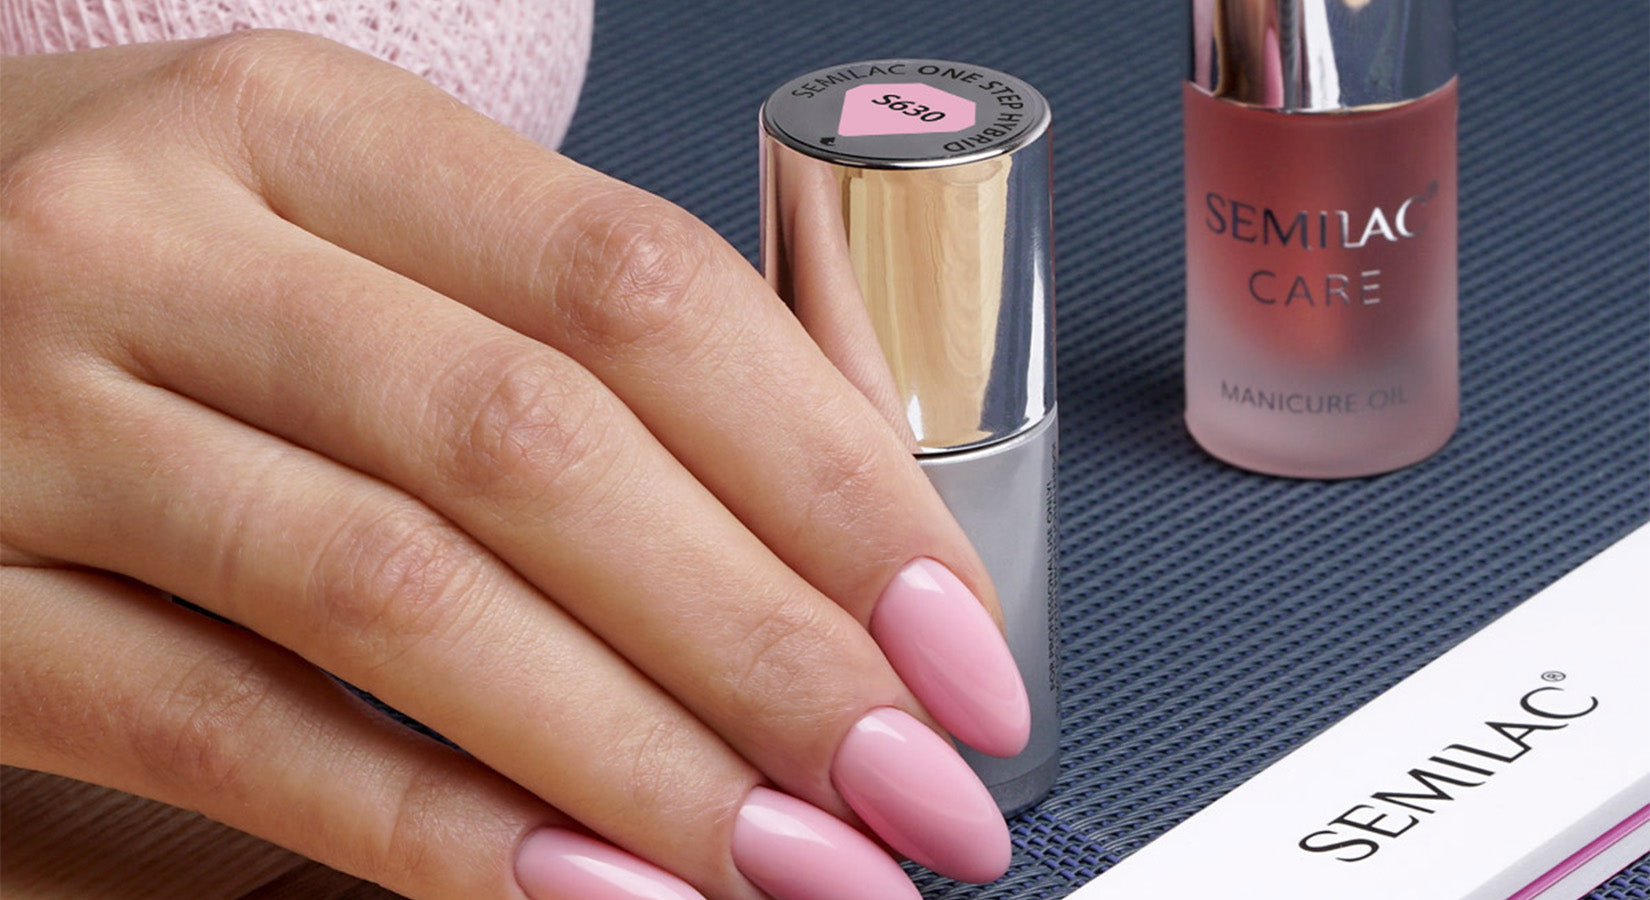 7 Essential Steps to Get Your Nails Ready for a Long-Lasting Gel Manicure